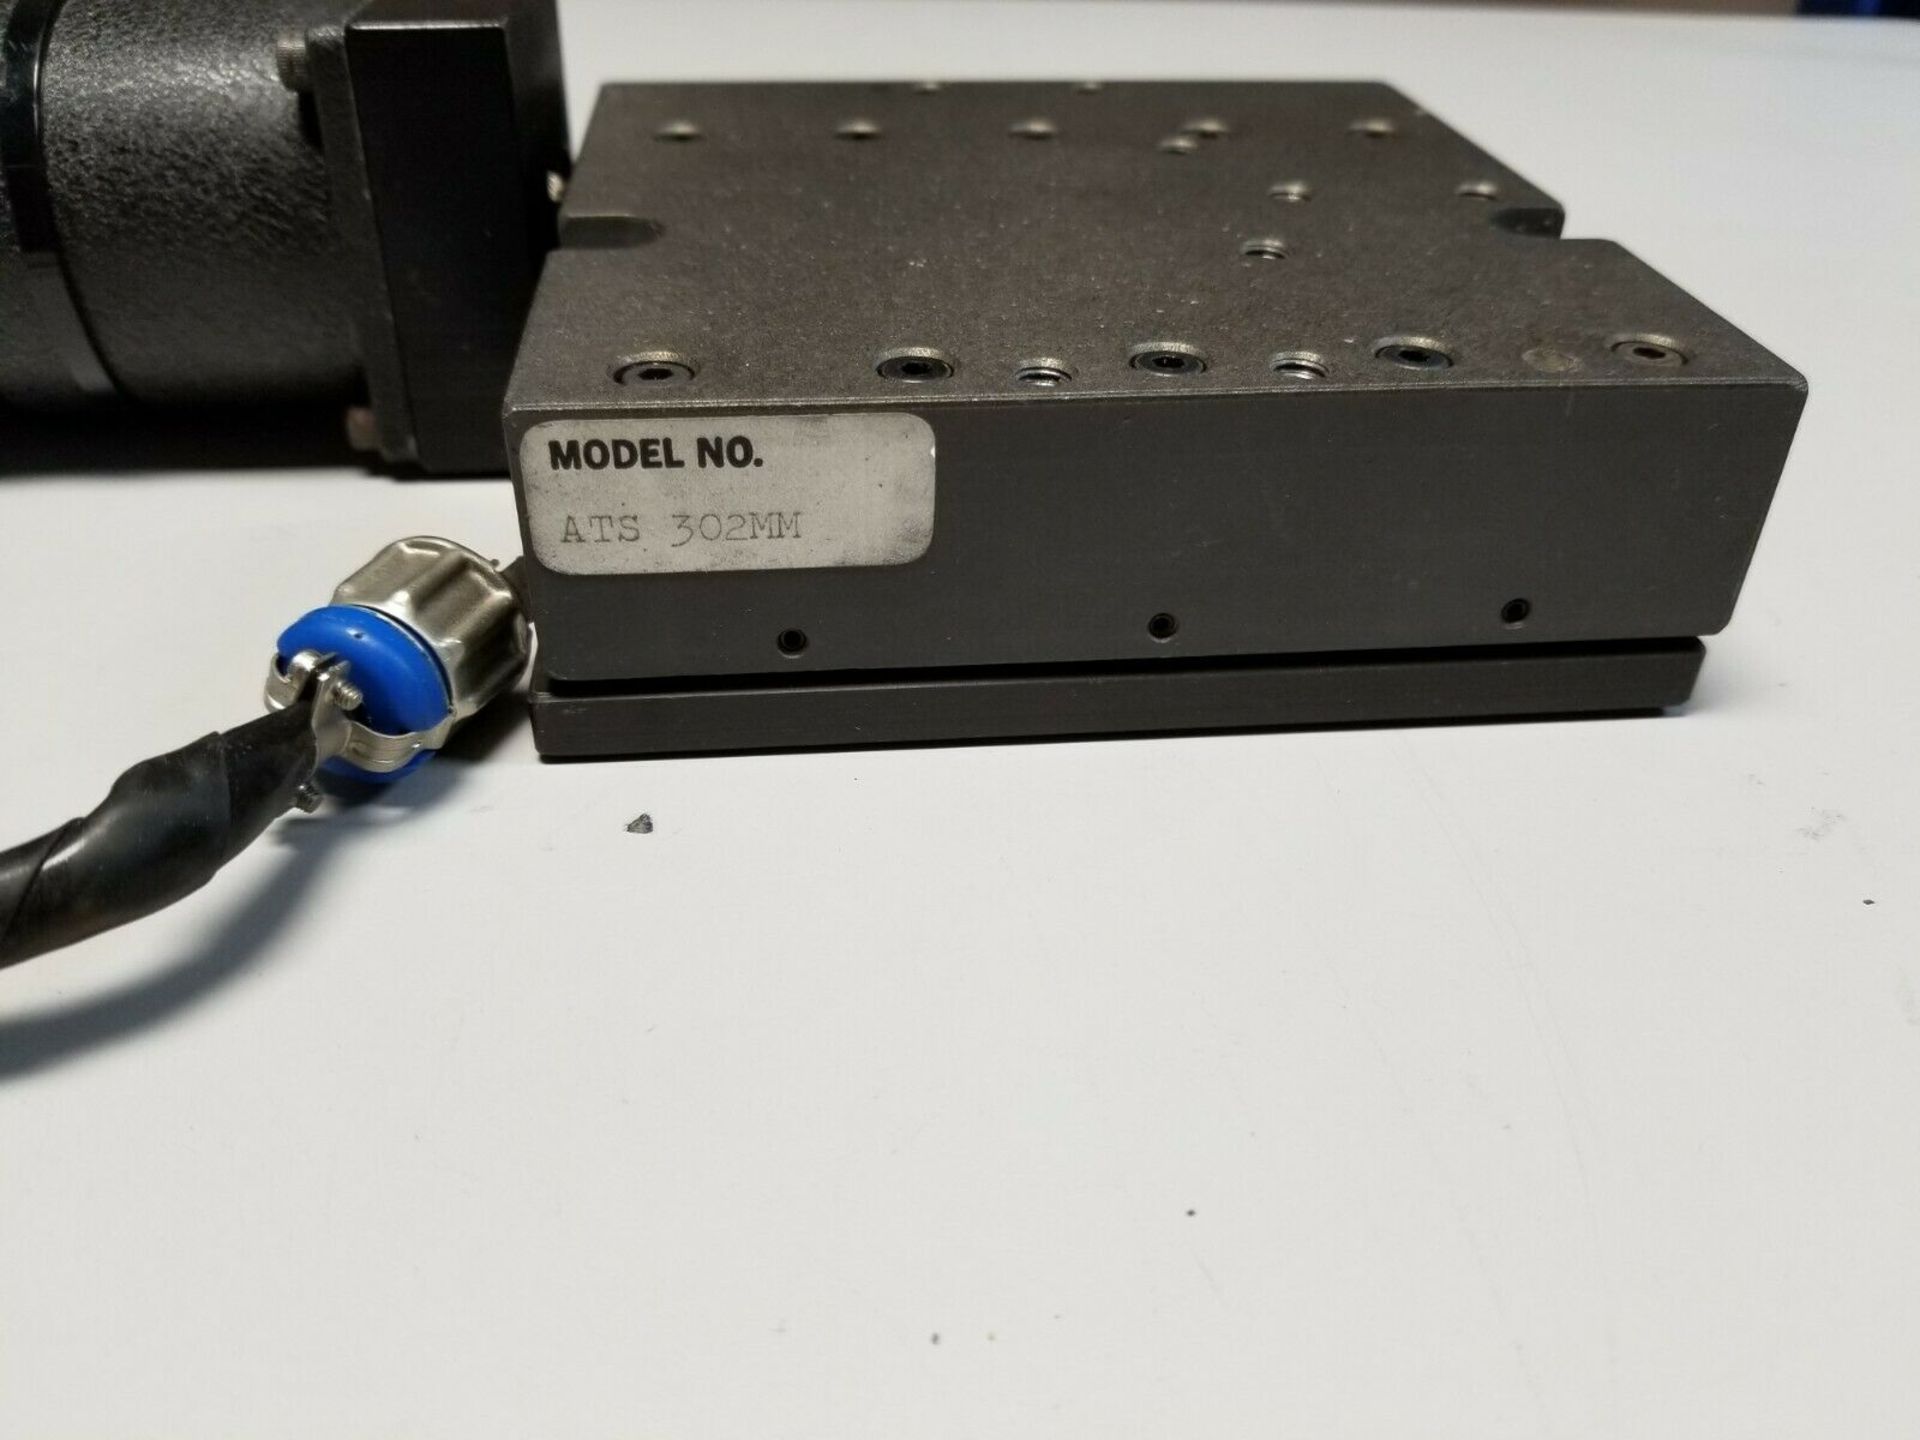 AEROTECH PRECISON LINEAR STAGE POSITIONER WITH STEPPER MOTOR & ENCODER - Image 5 of 11